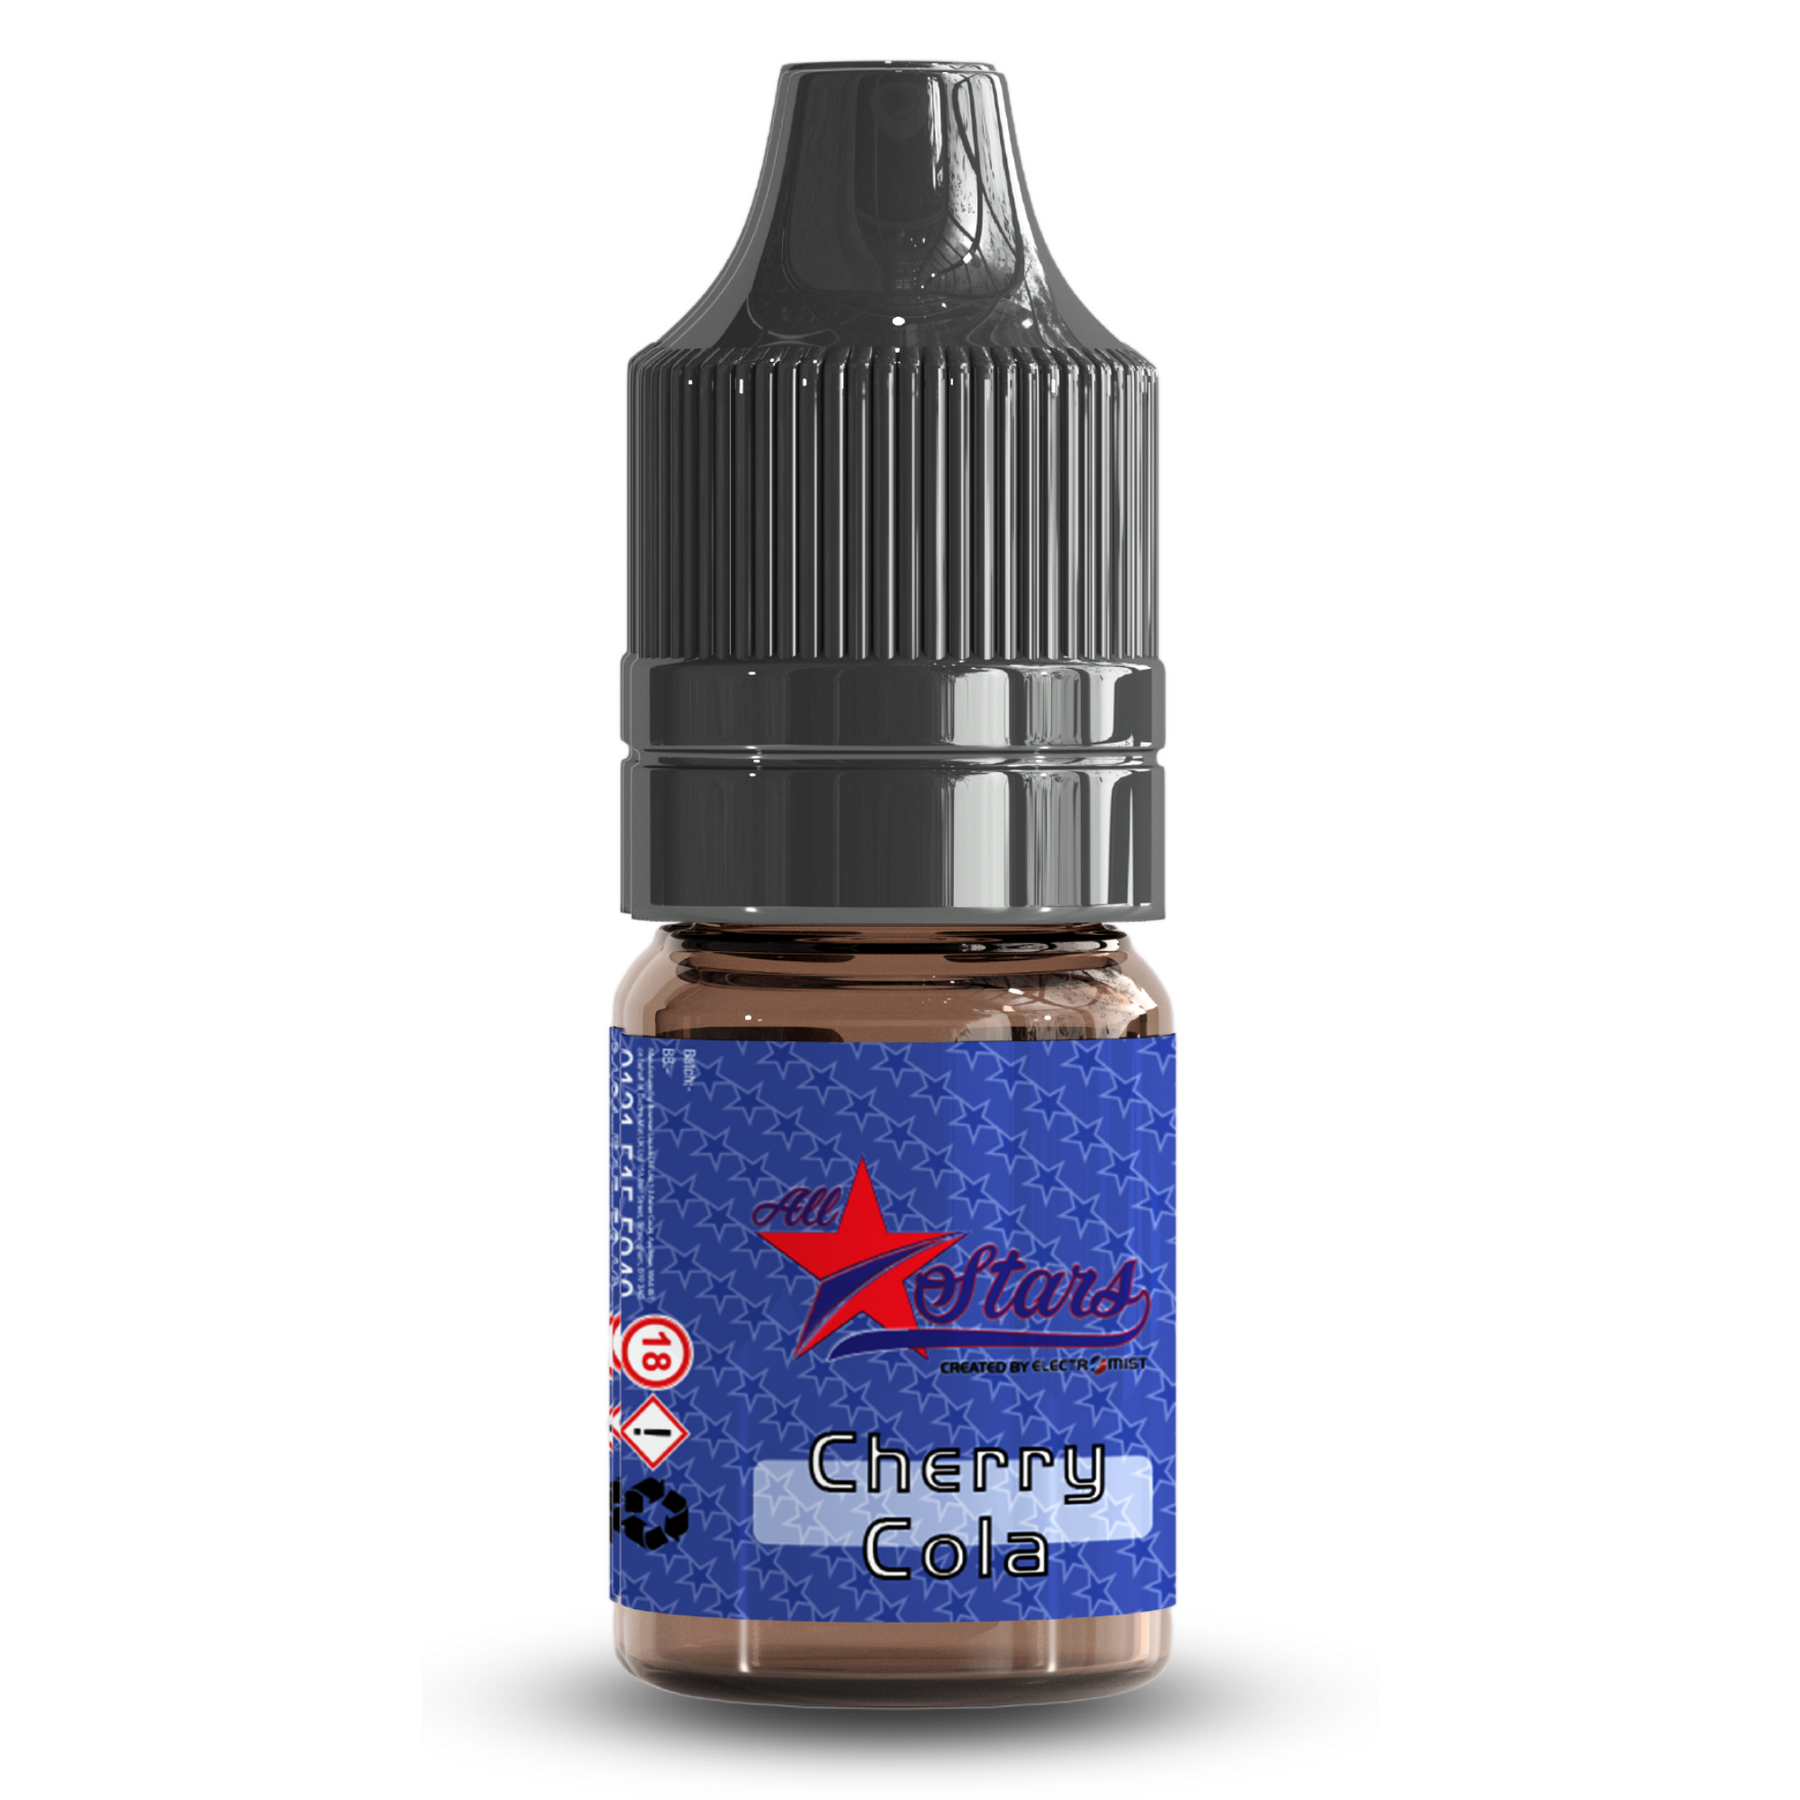 All Stars E-Liquid from the vape brand you can trust, Electromist, . Get your taste buds ready for a flavour sensation, Cherry Cola. Nicotine Content: 6mg/12mg/18mg Products may contain nicotine. For over 18s Only ejuice, vape pen, eliquid, e cigarette, 10ml, vaping, cloud, PG, VG, 60/40, vape liquid, Flavour, TPD